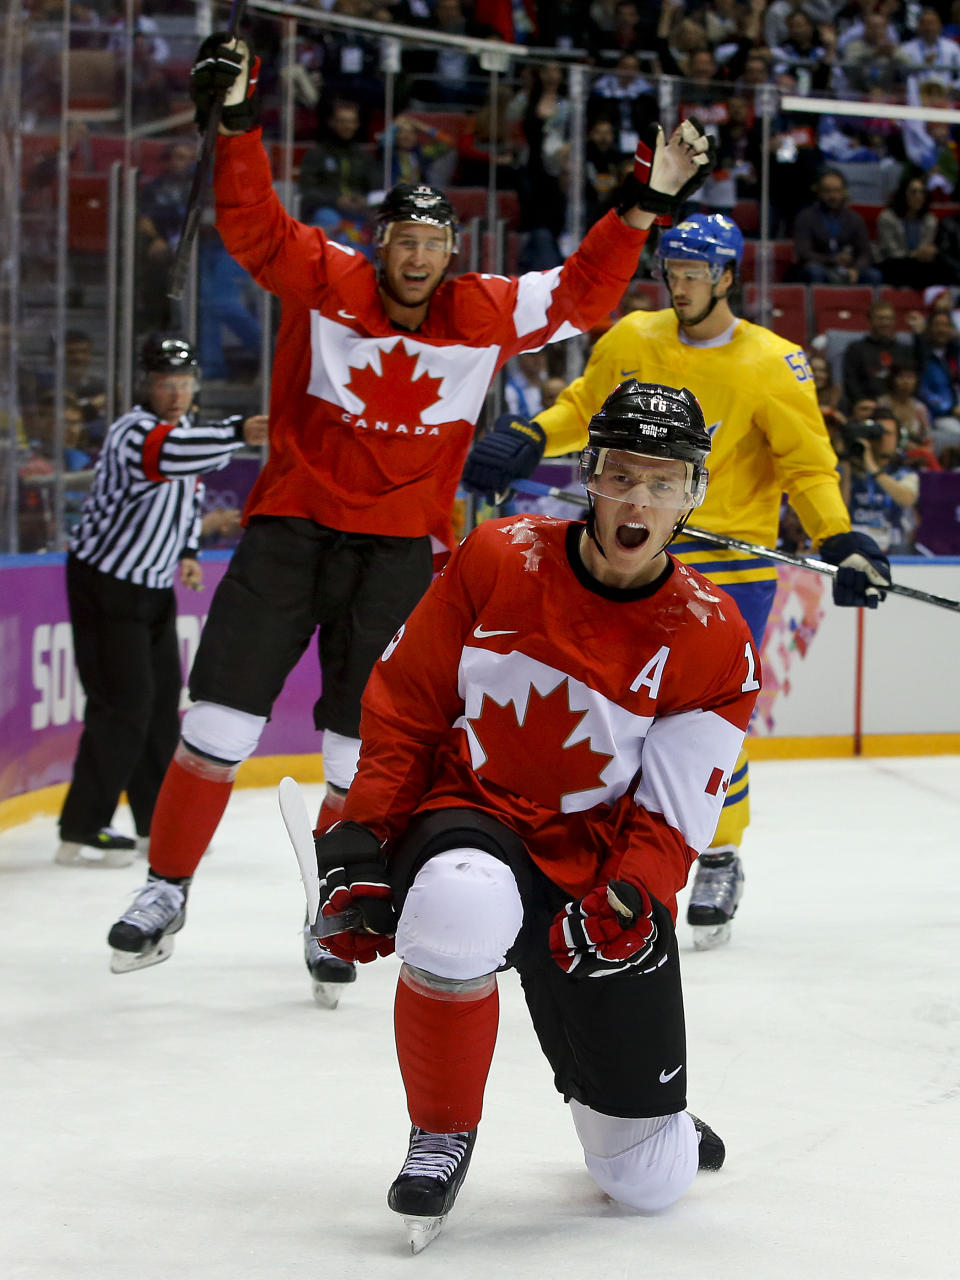 Canada forward Jonathan Toews reacts after scoring a goal against Sweden during the first period of the men's gold medal ice hockey game at the 2014 Winter Olympics, Sunday, Feb. 23, 2014, in Sochi, Russia. (AP Photo/Matt Slocum)